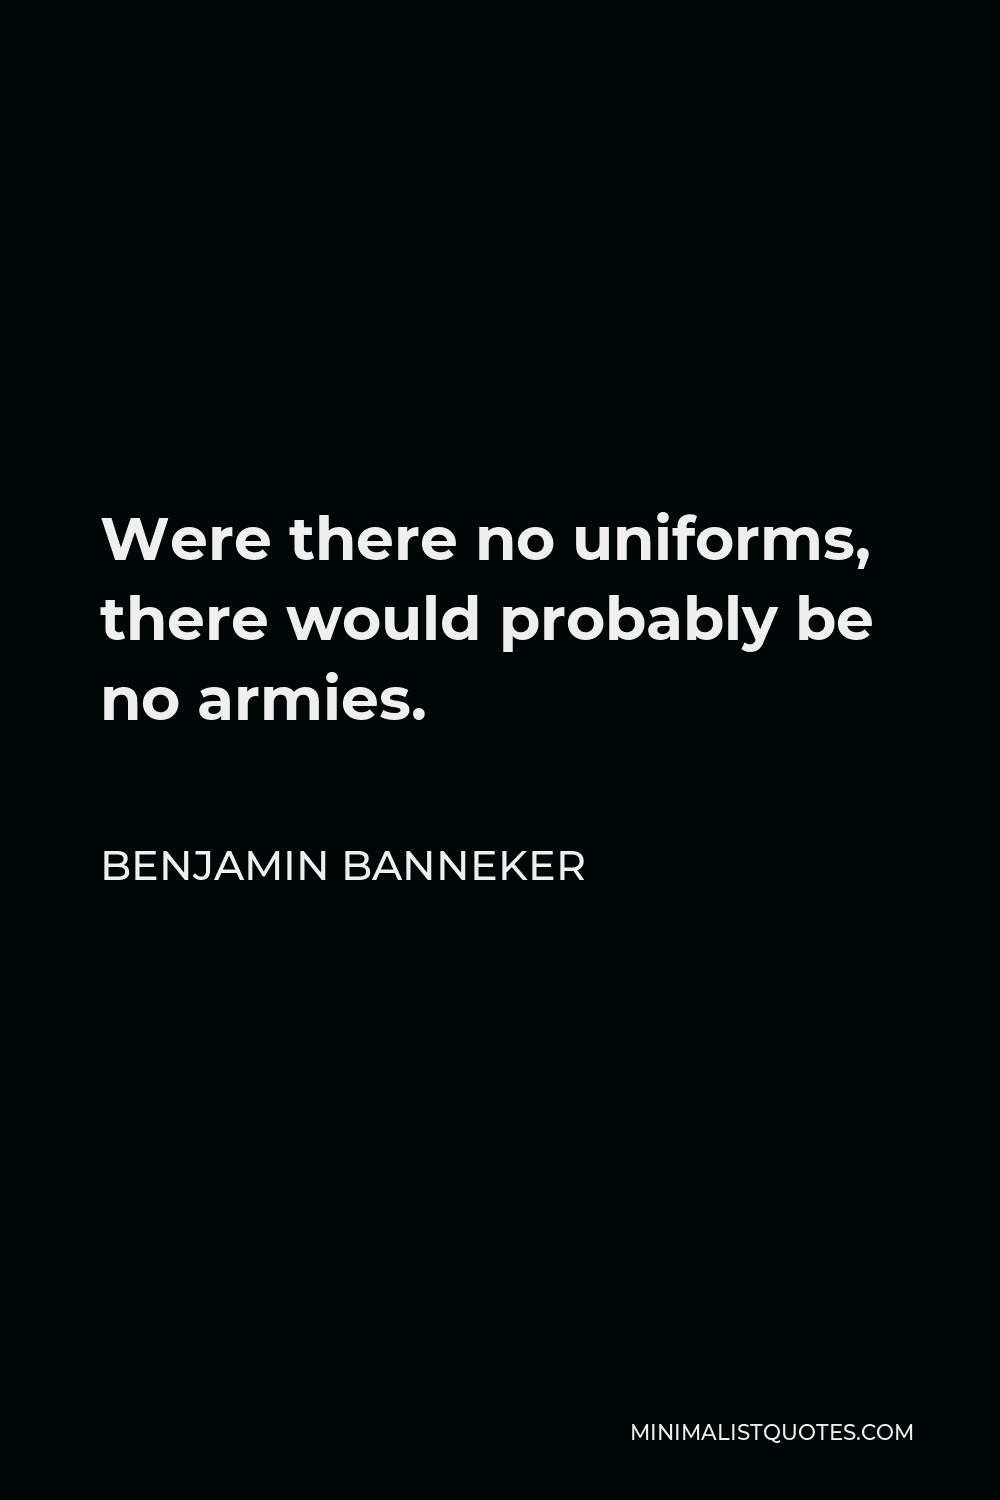 Benjamin Banneker Quote - Were there no uniforms, there would probably be no armies.